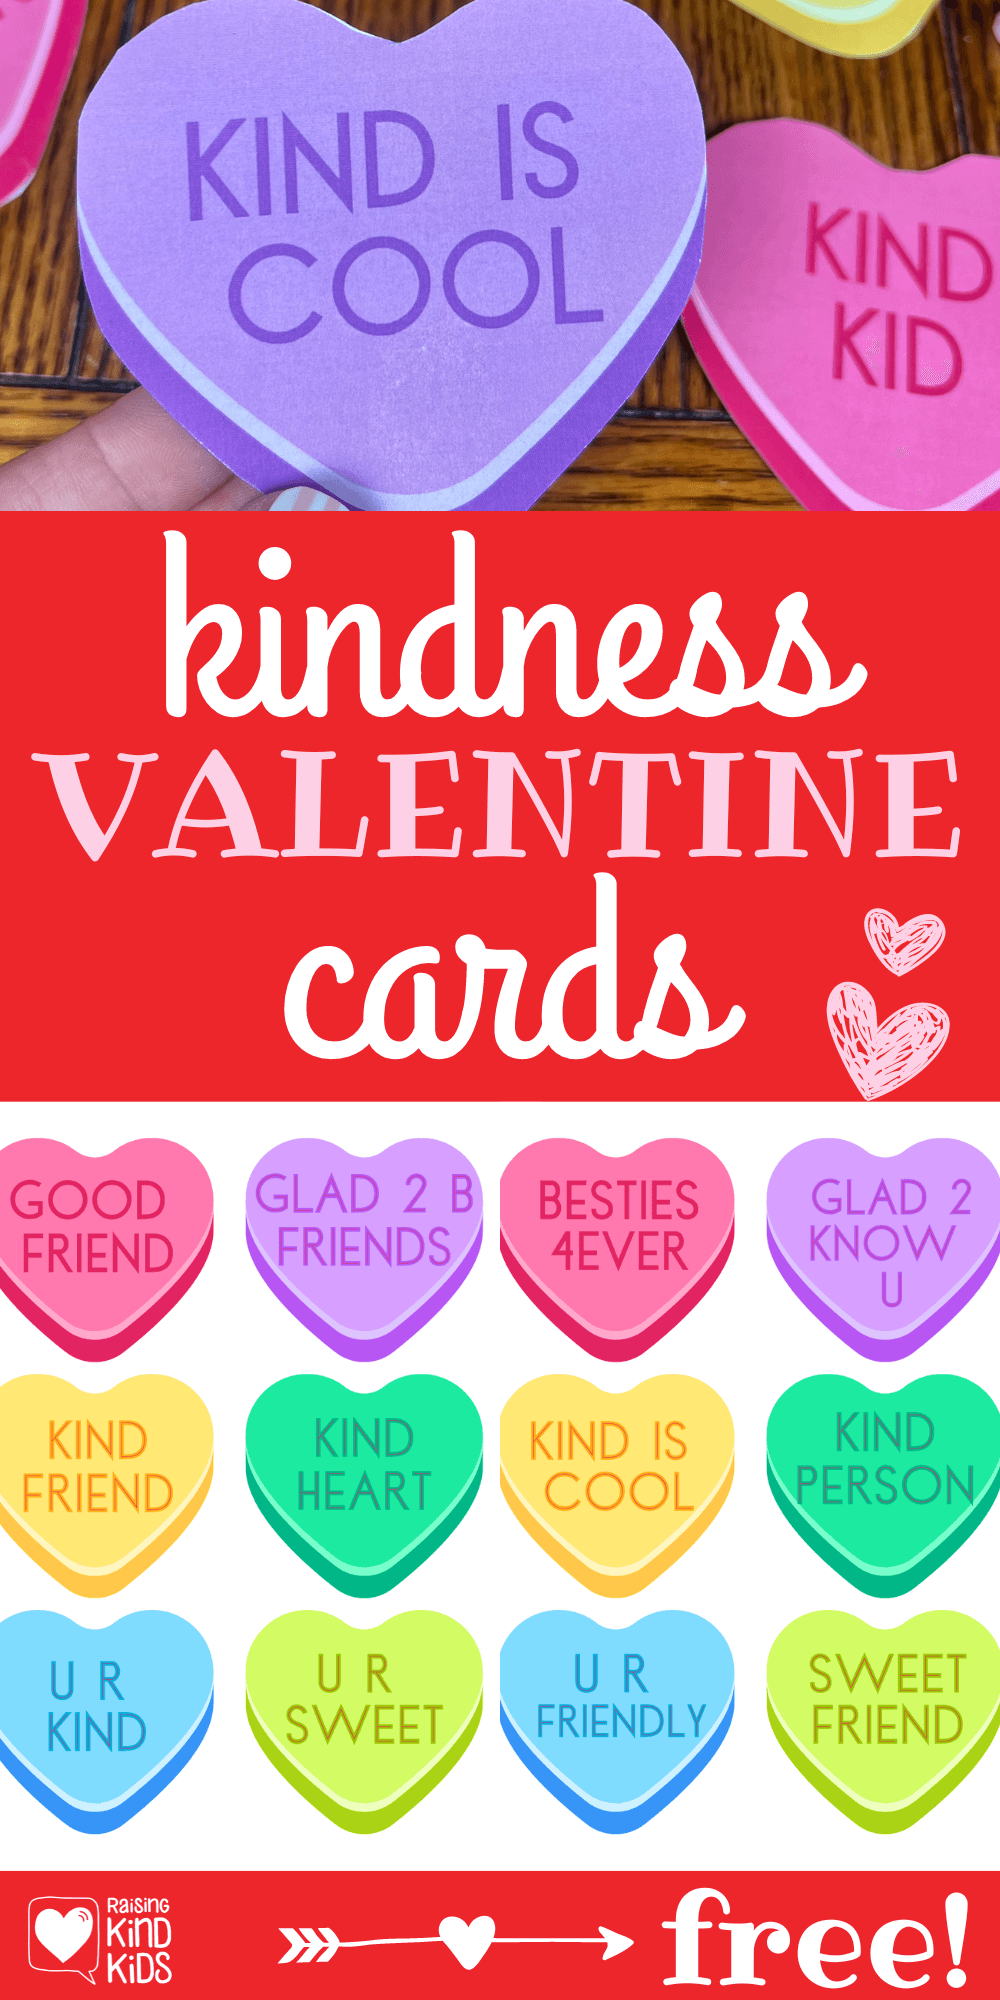 Use these printable valentine cards to spread kindness this Valentine's Day on conversation hearts.